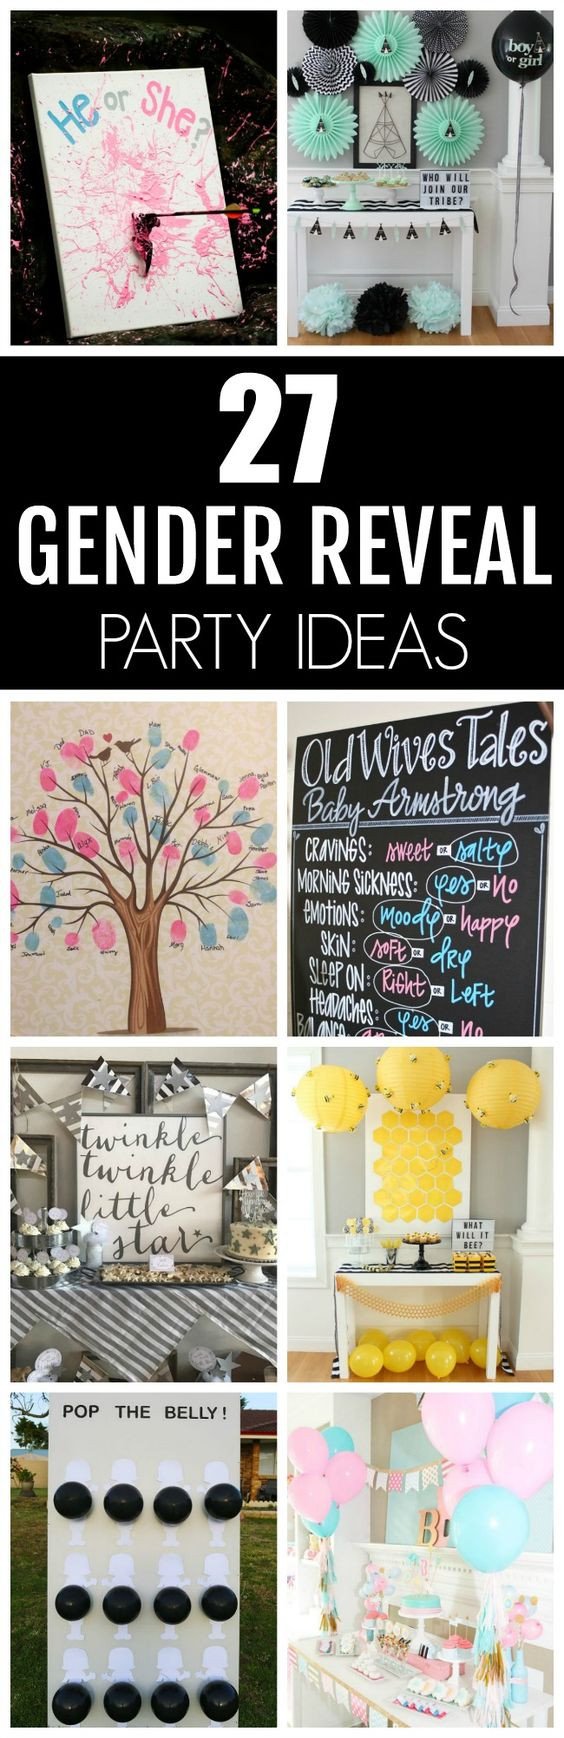 Cool Ideas For Gender Reveal Party
 27 Creative Gender Reveal Party Ideas Pretty My Party